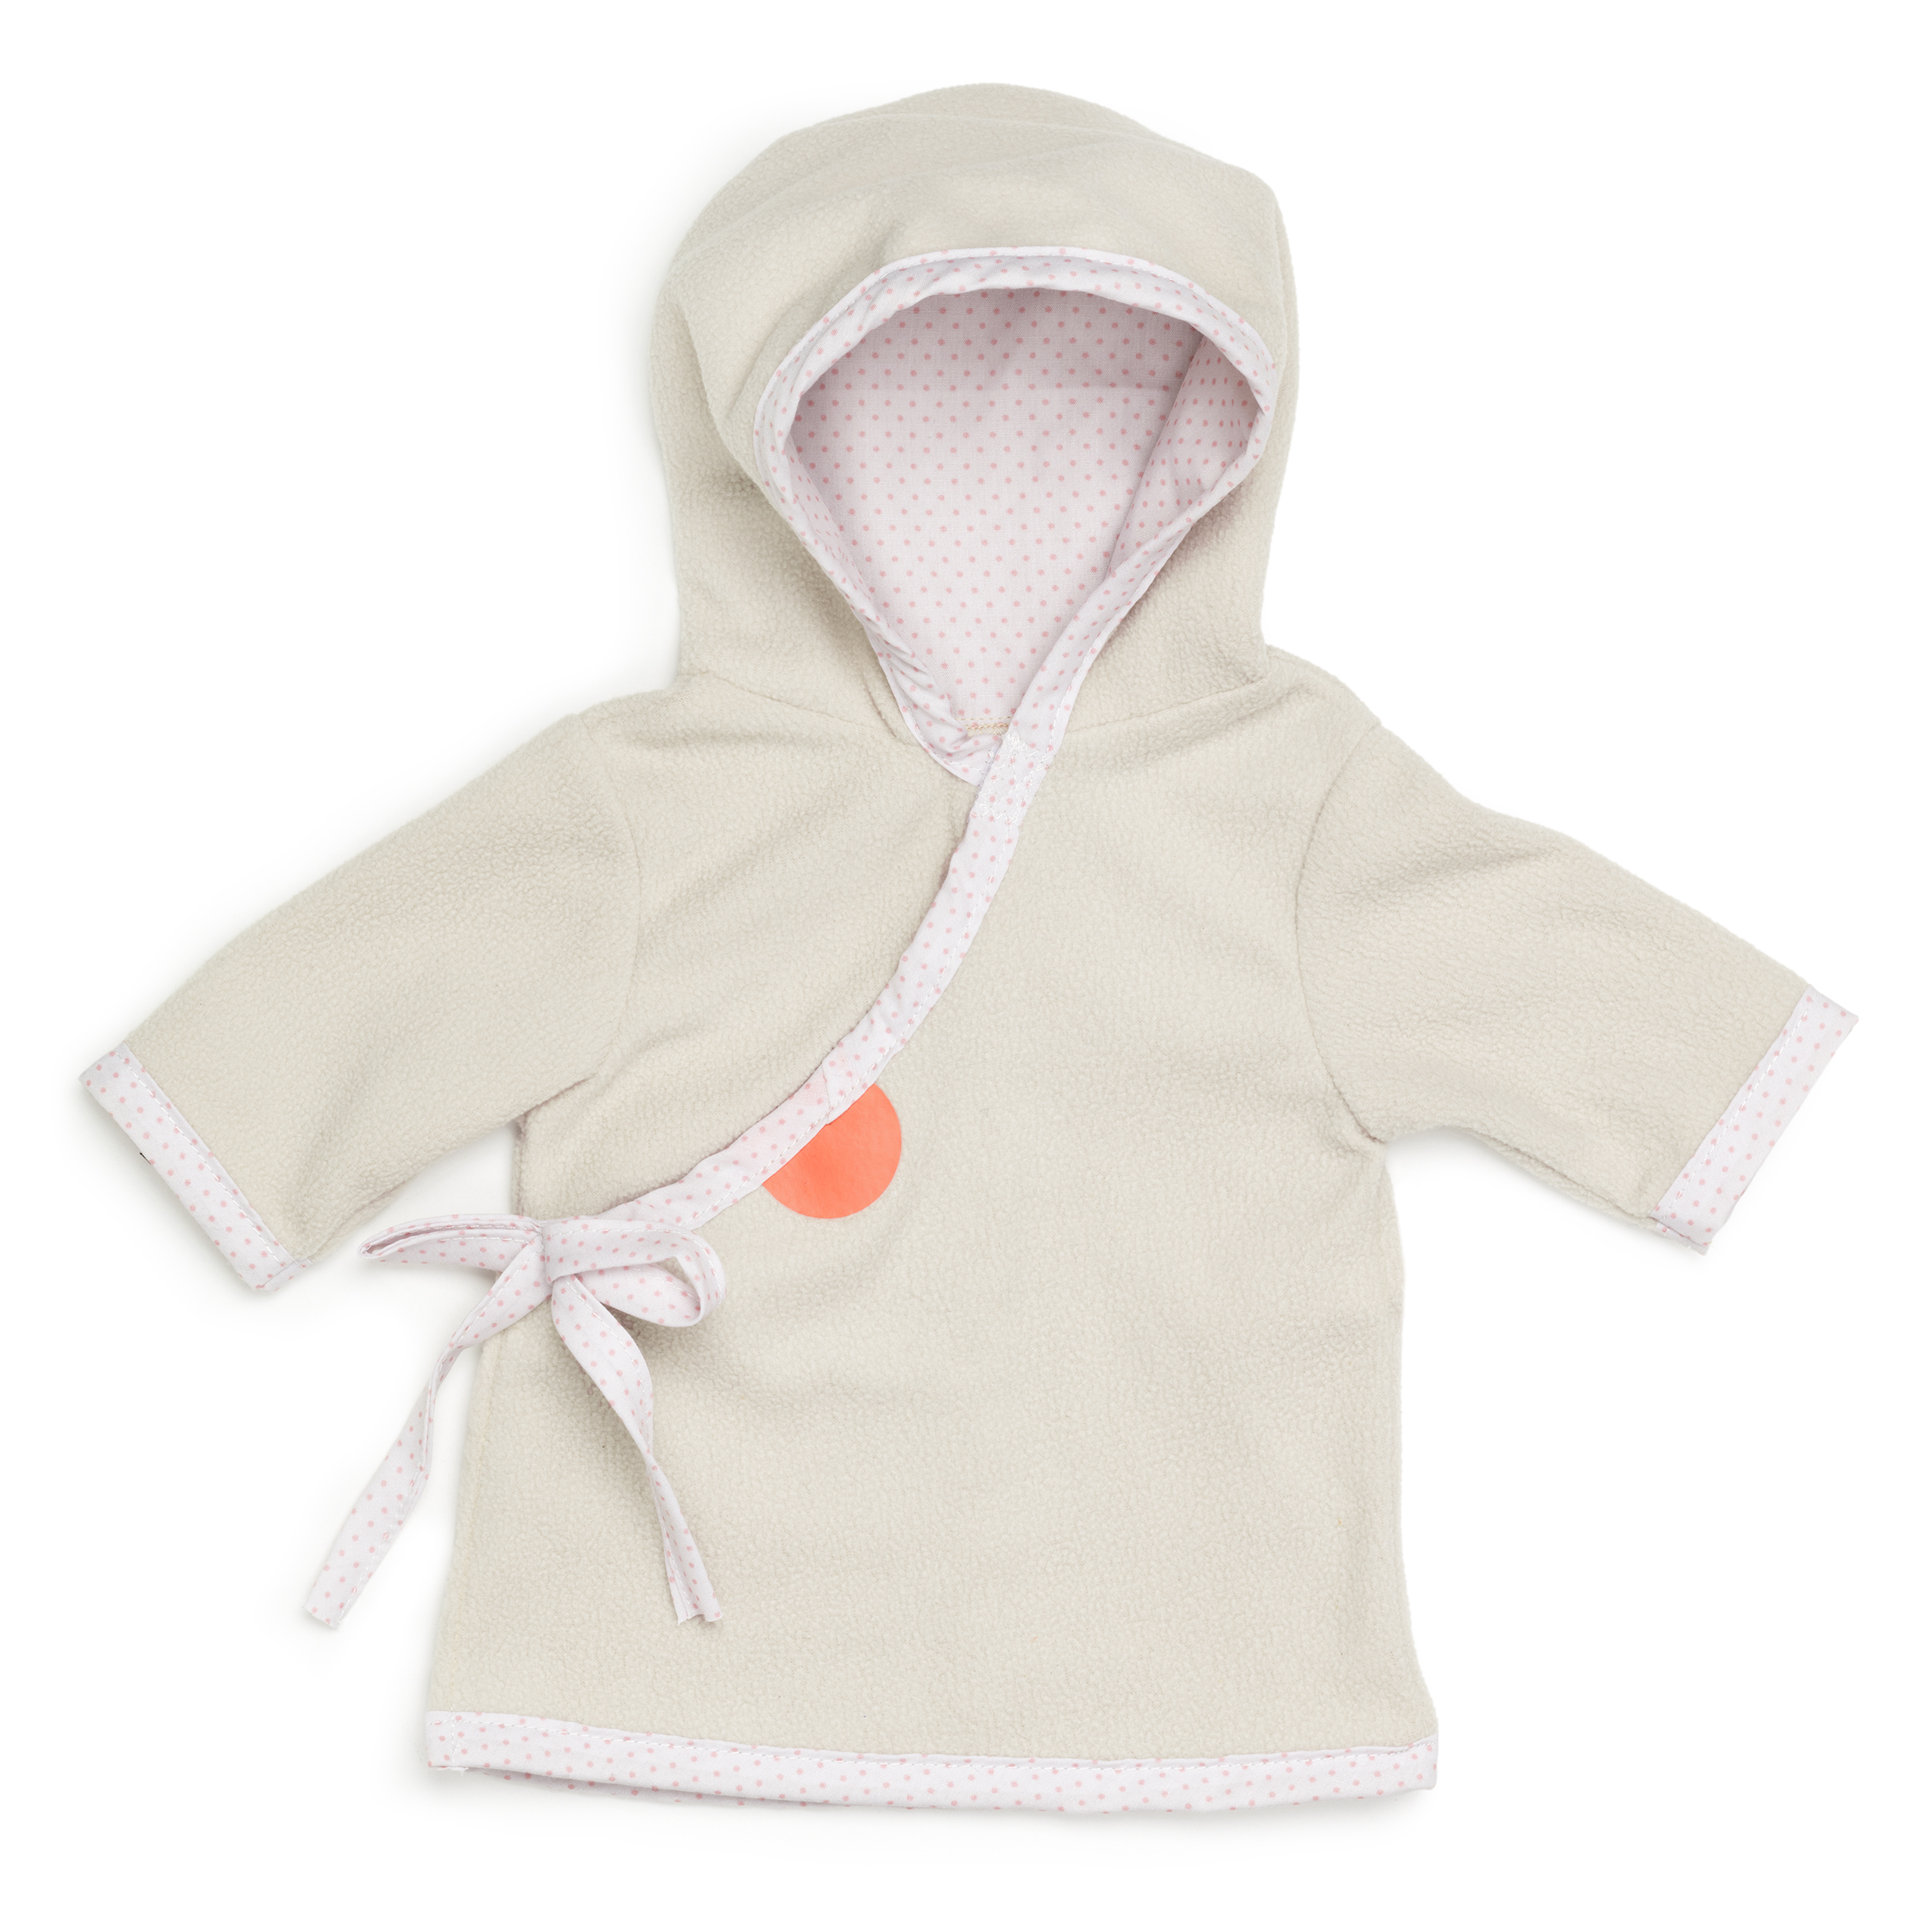 Doll clothes lundby	doll clothes dressing gown 45 cm